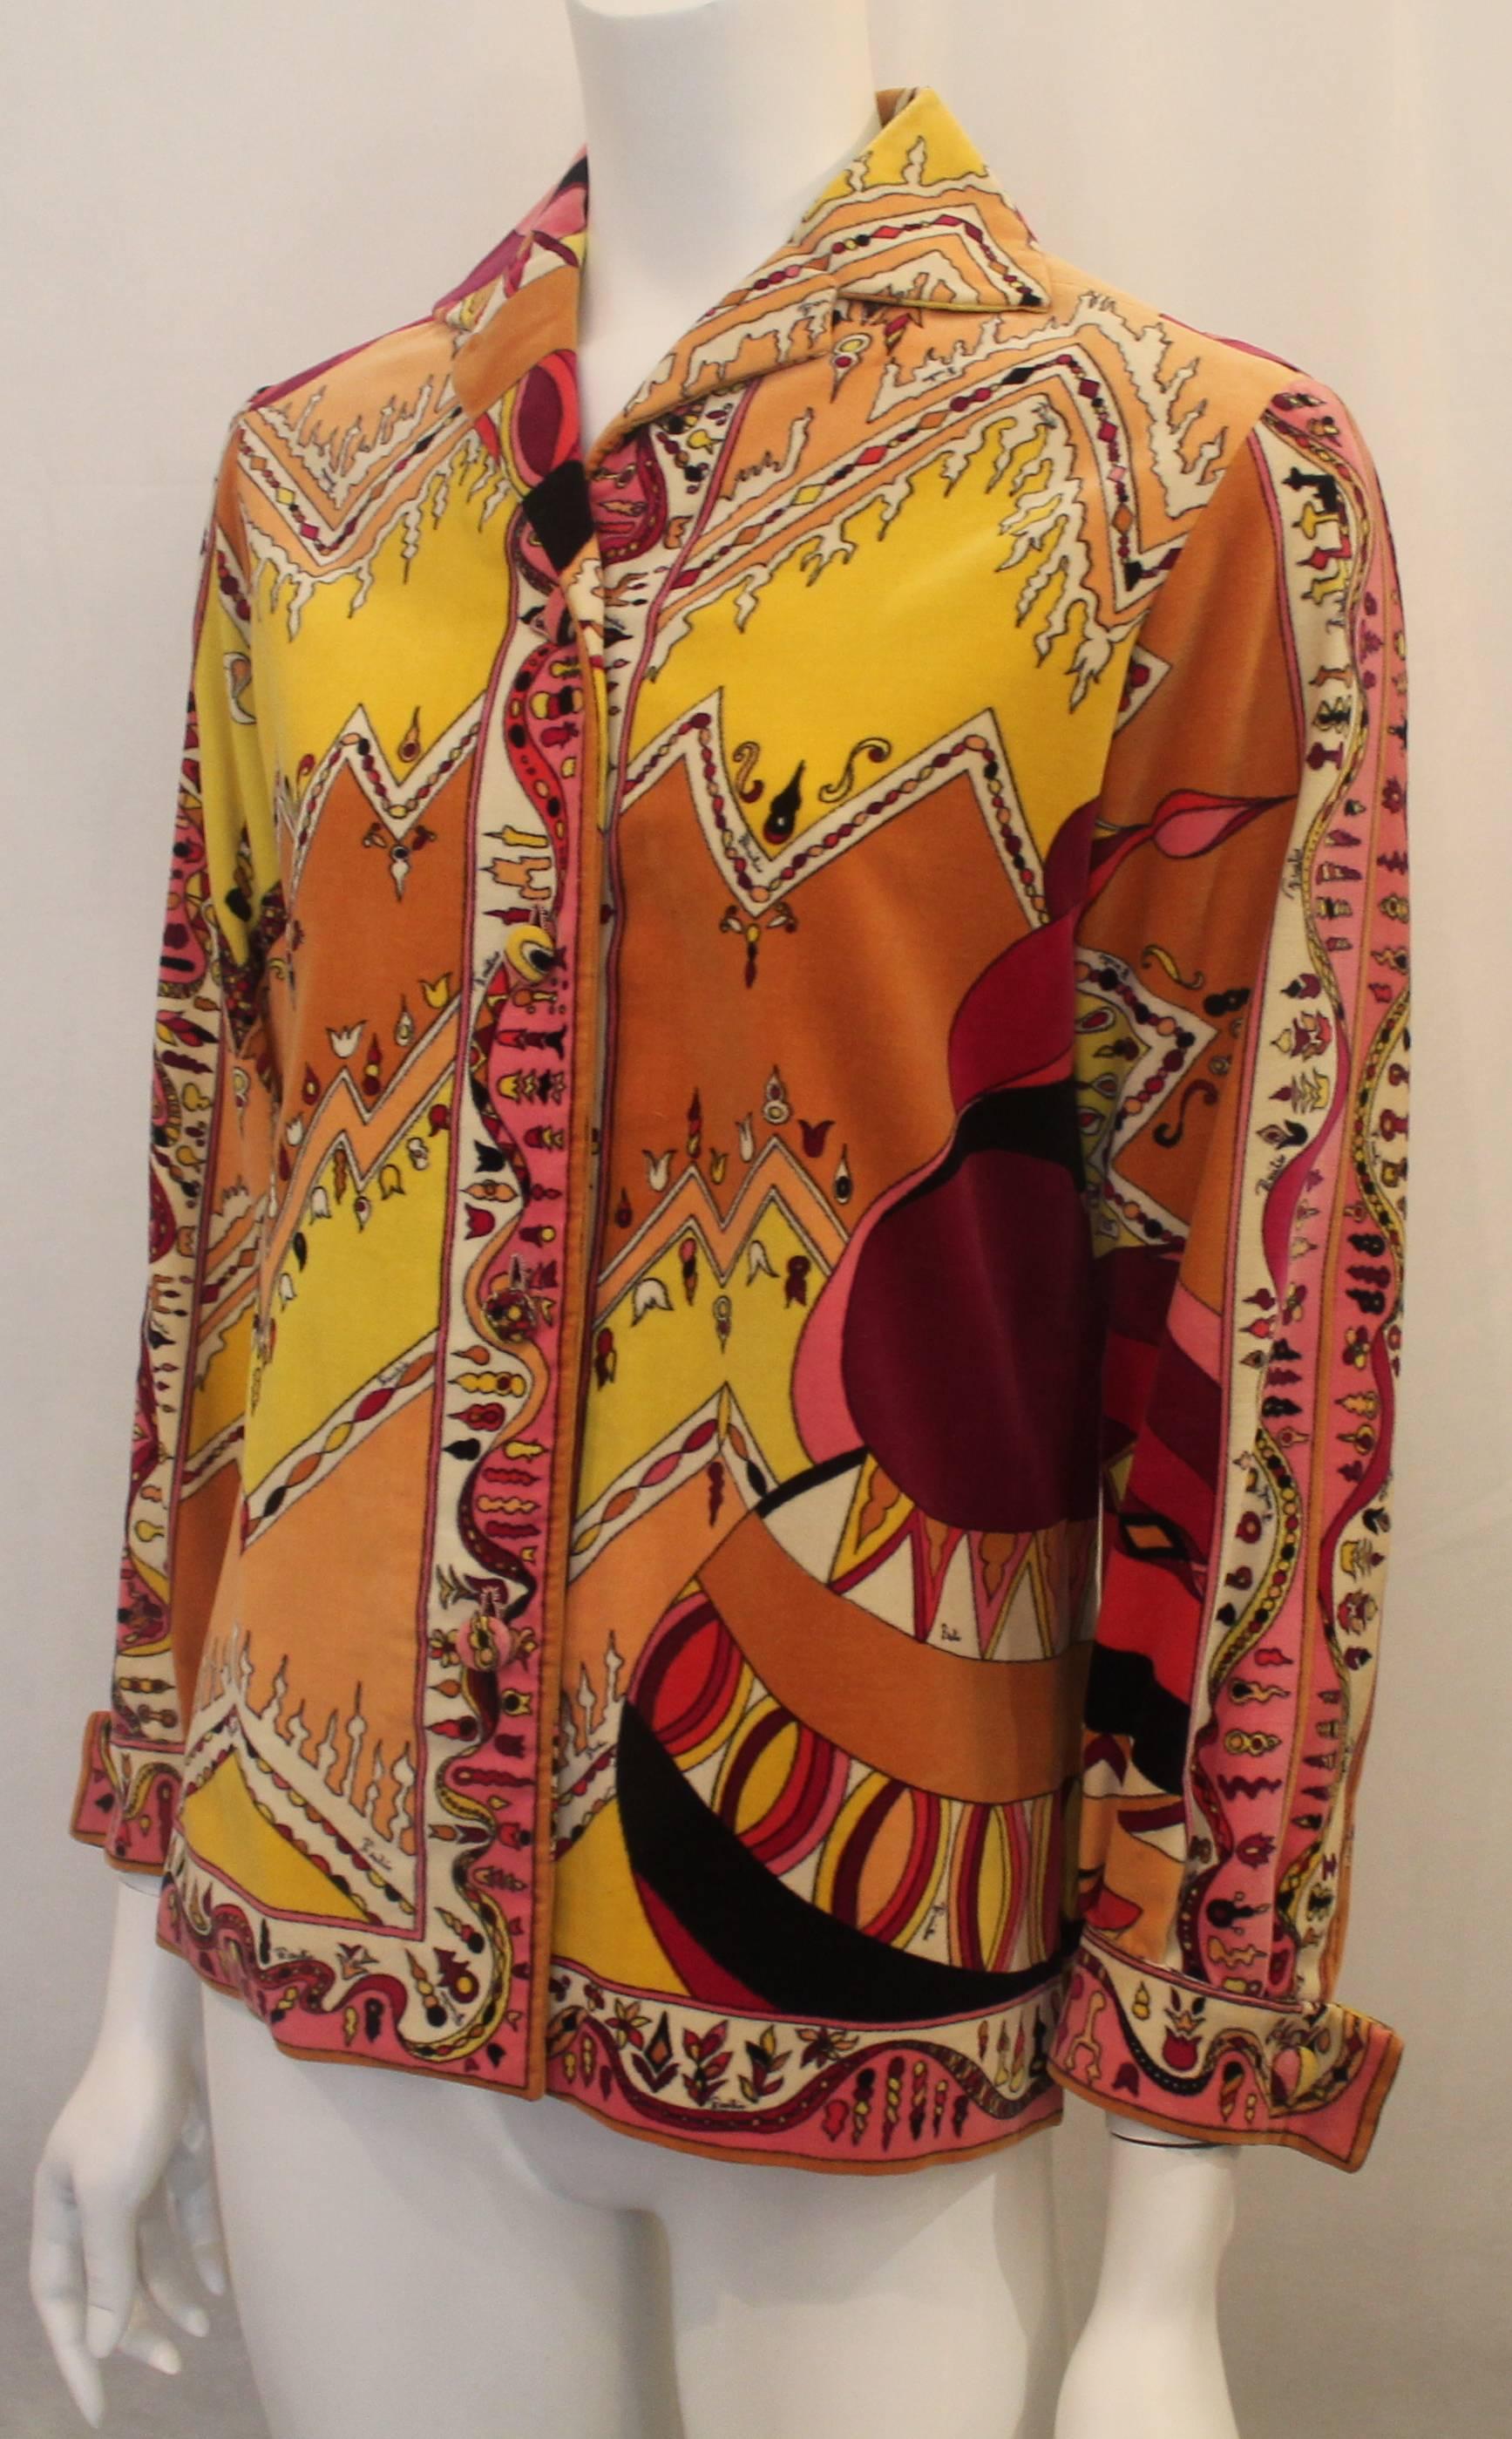 Vintage Pucci Multi Colored Velvet Cotton Shirt Jacket  - 4 - circa 1970's. This vintage Pucci shirt jacket is many colors such as pink, yellow, black, peach, cream and purple. It has front buttons and comes with three extra buttons. The sleeves are